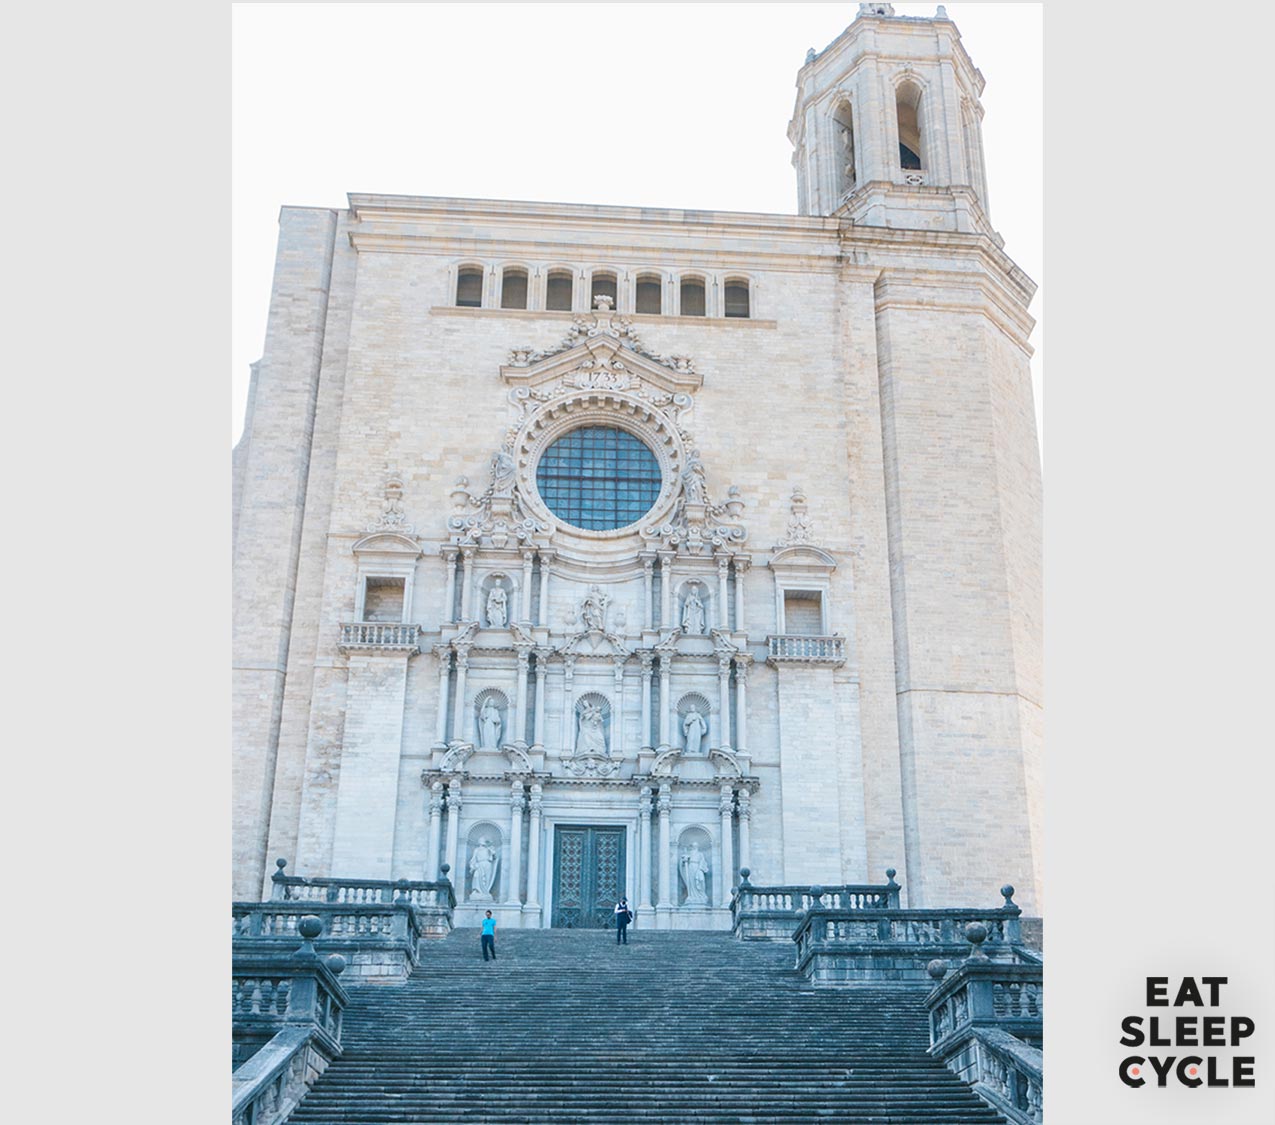 Cafe-Crowdfunding-Campaign-Eat-Sleep-Cycle-Catheddral-Sant-Marie